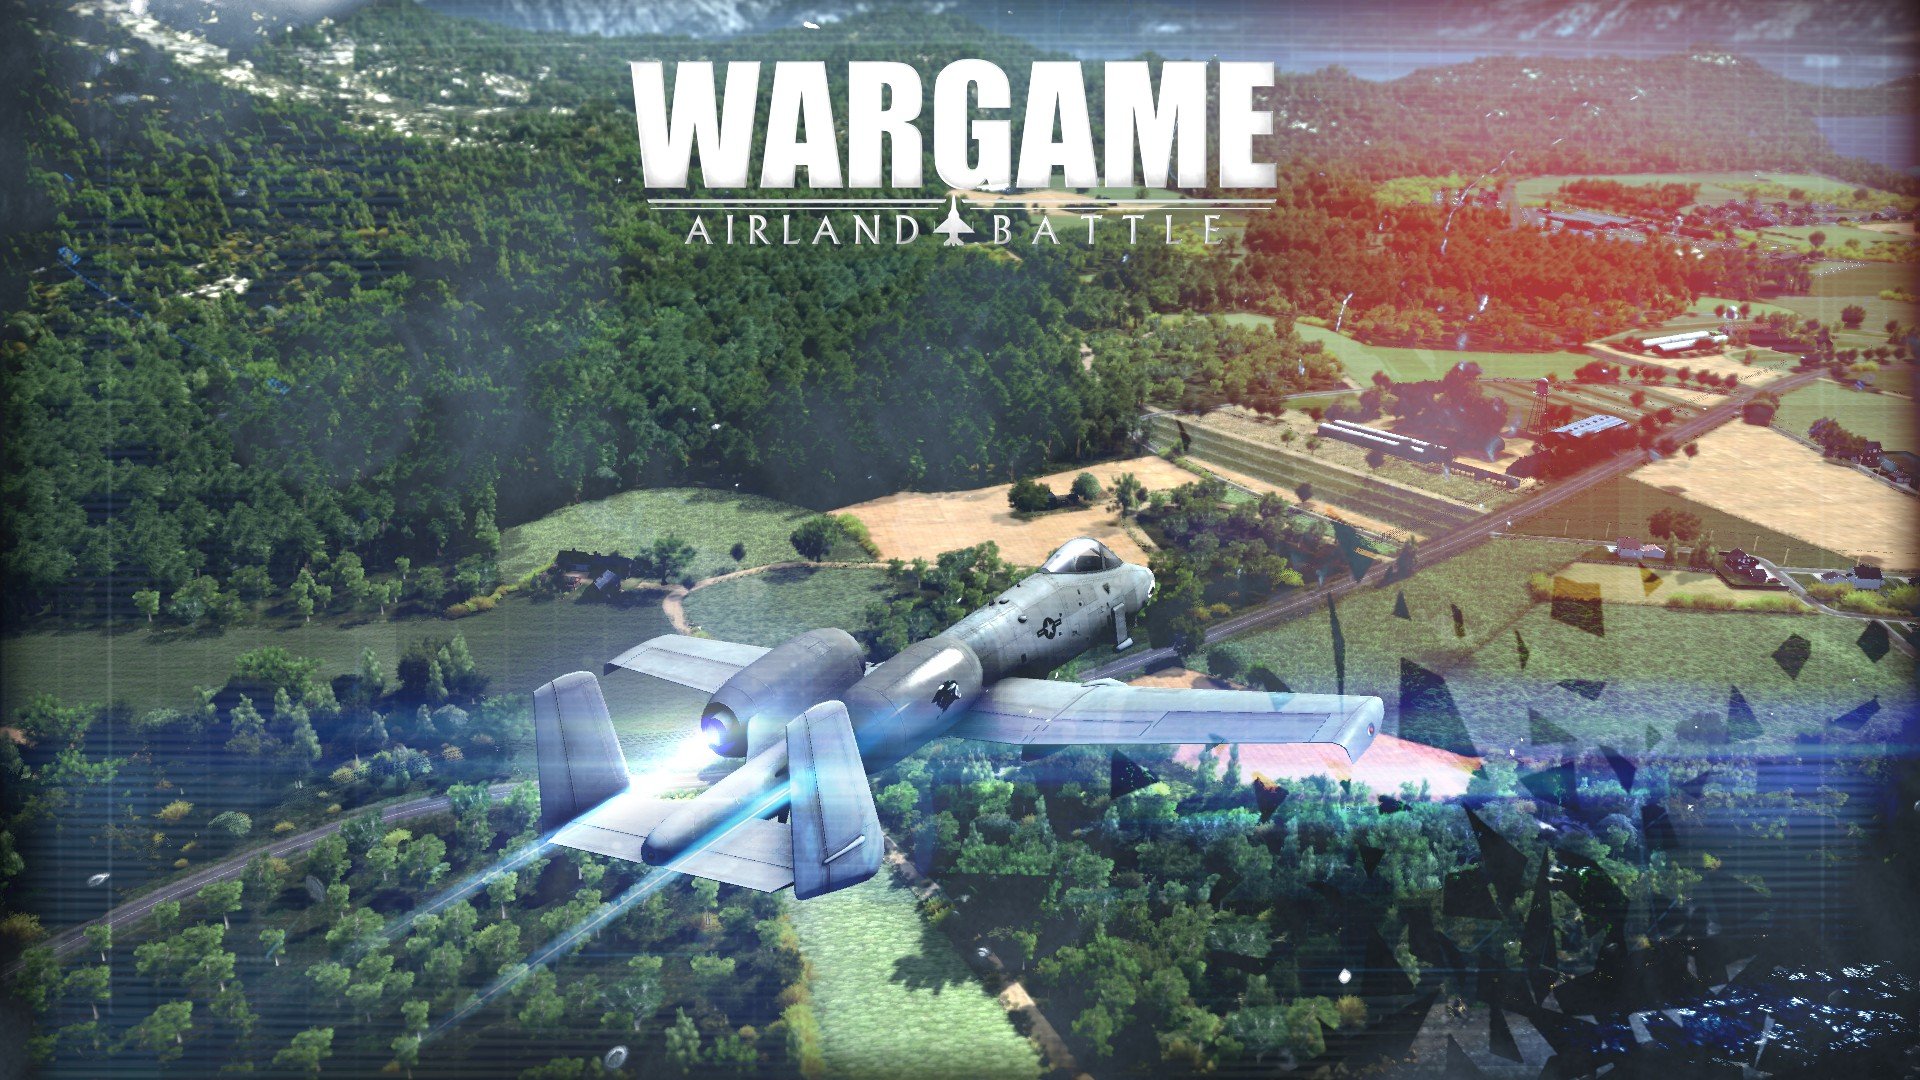 Wargame AirLand Battle an RTS game developed by Eugen Systems and